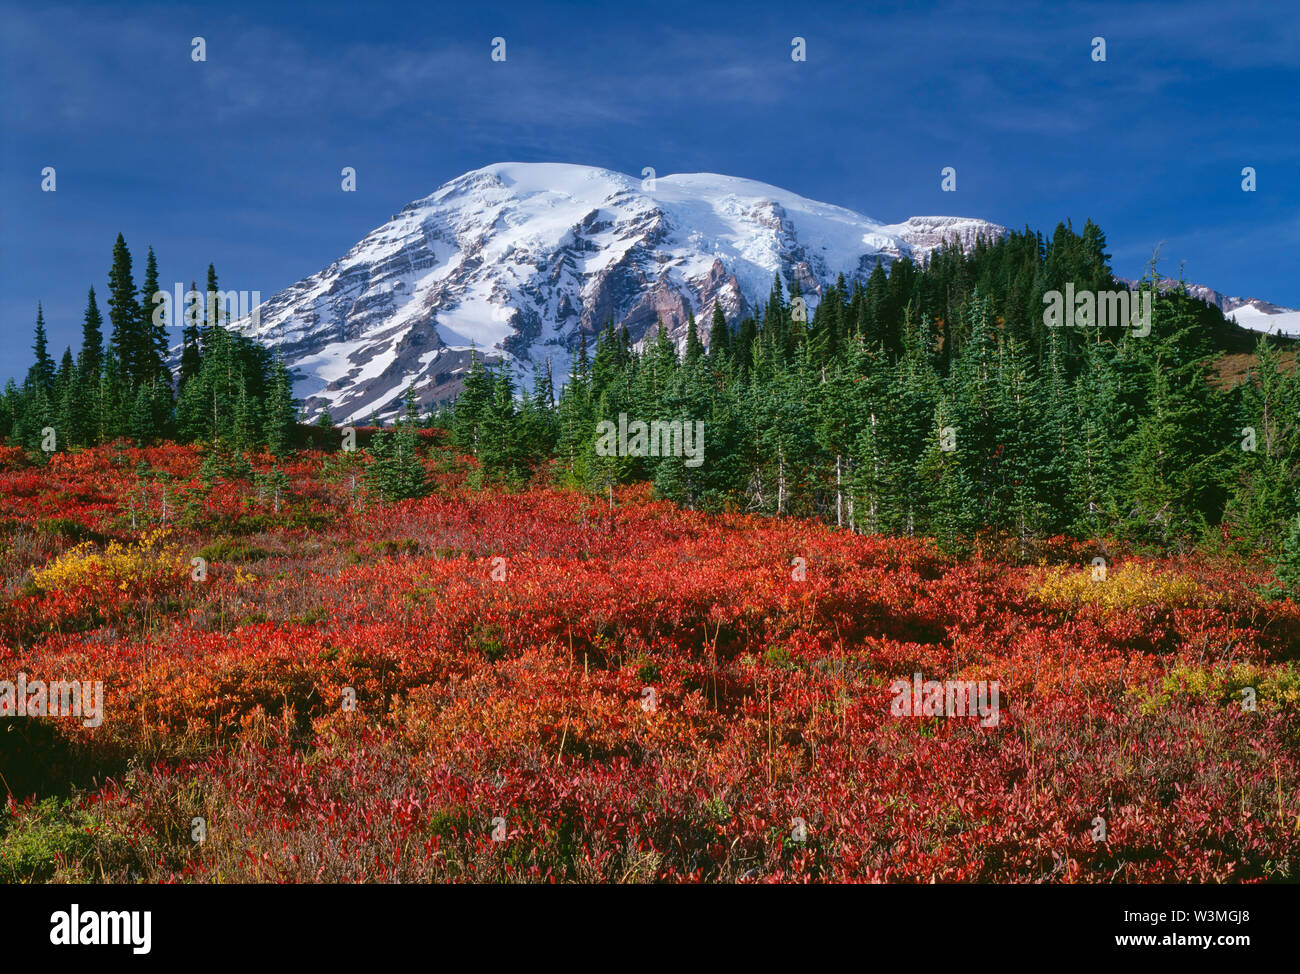 USA, Washington, Mt. Rainier National Park, Mt. Rainier rises above fall-colored meadow of huckleberry and conifers in the Paradise area. Stock Photo